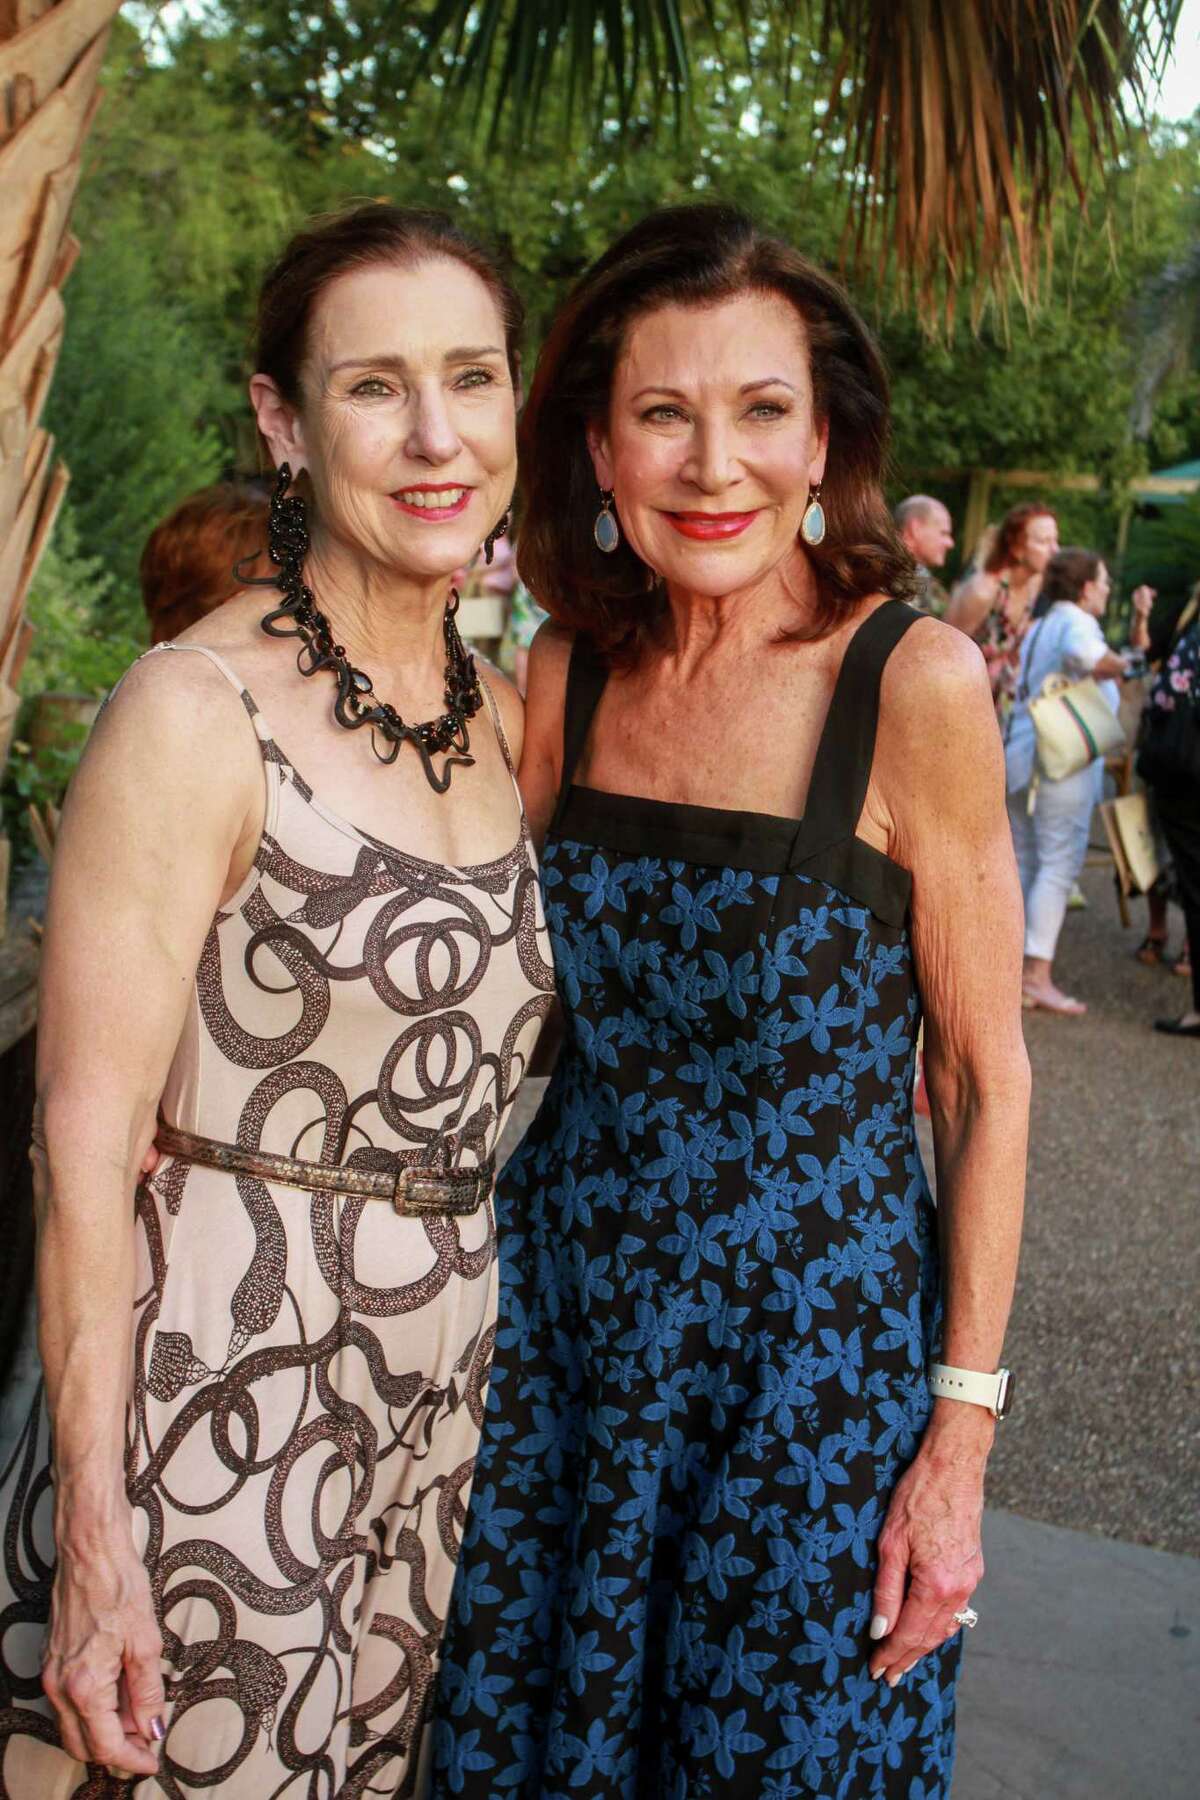 Mary Maxey, left, and Betty Hrncir at the Houston Zoo's 12th annual Wildlife Conservation Gala on October 10, 2019.